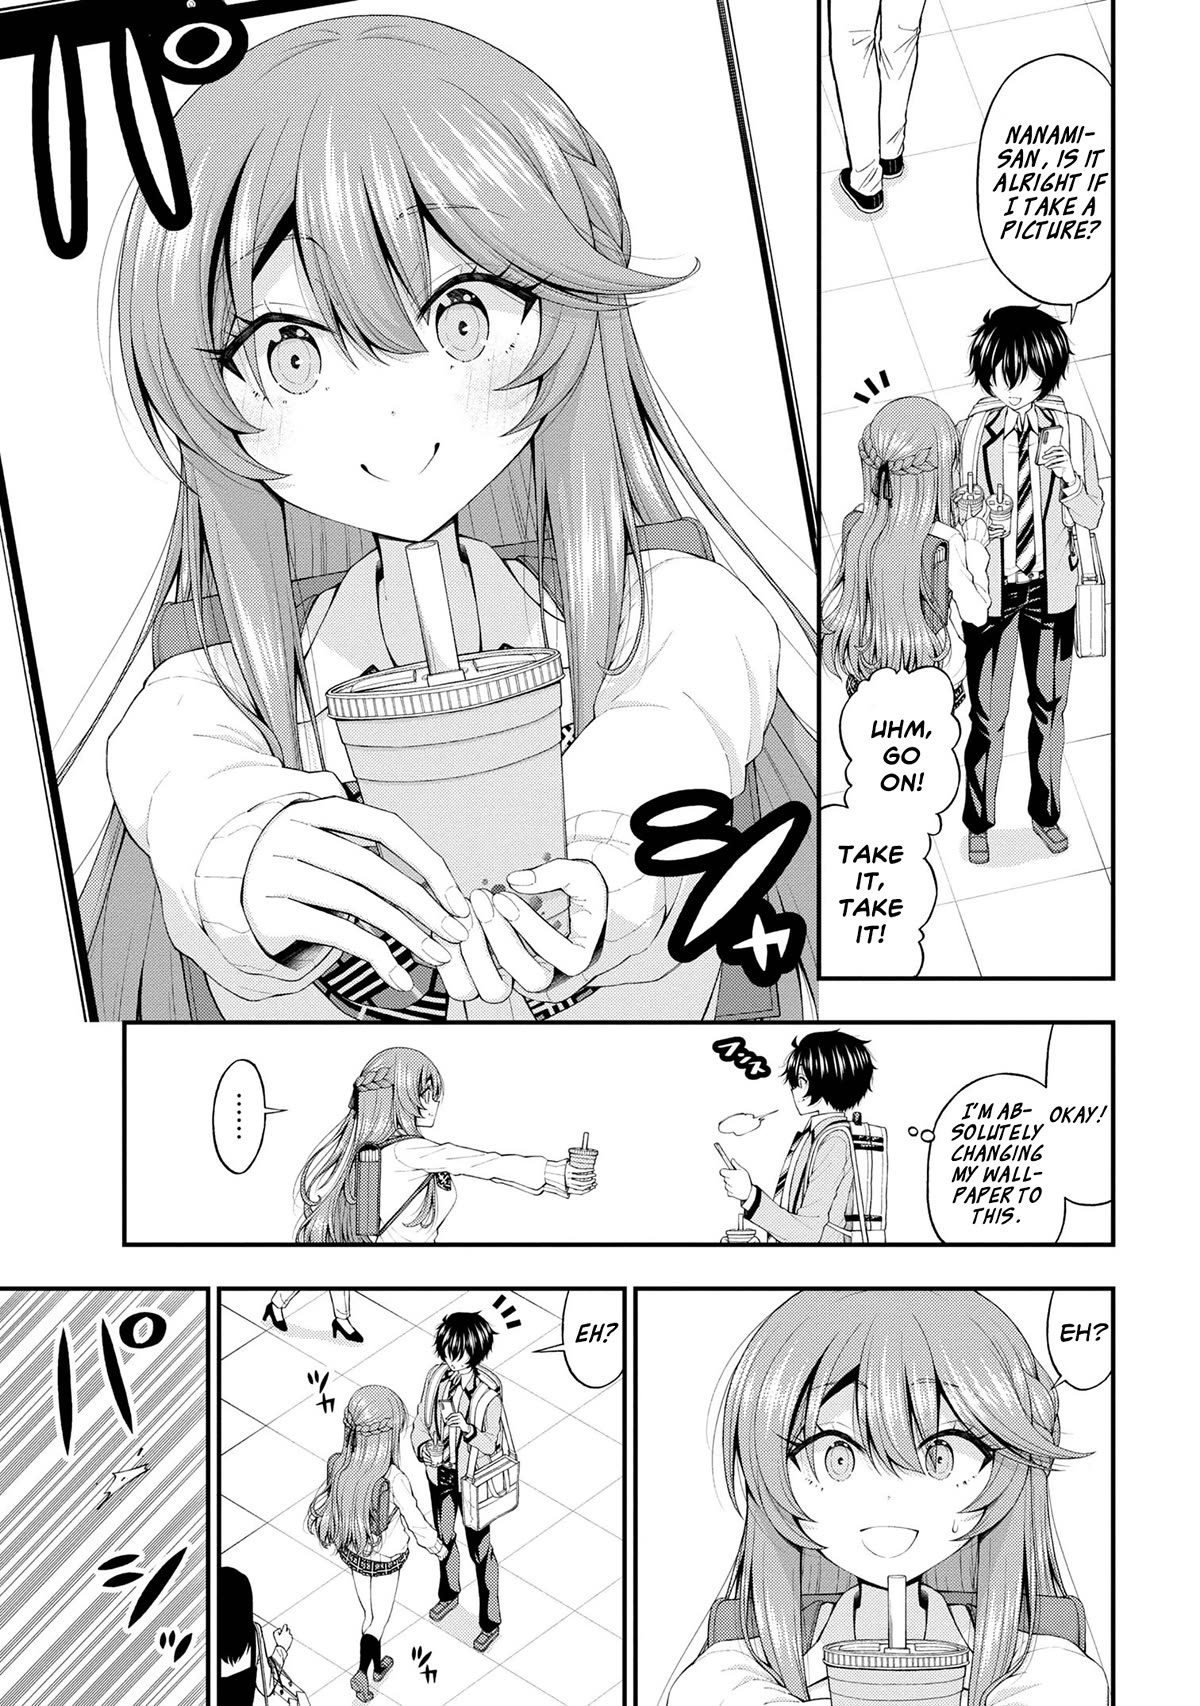 The Gal Who Was Meant to Confess to Me as a Game Punishment Has Apparently Fallen in Love with Me - chapter 14 - #5